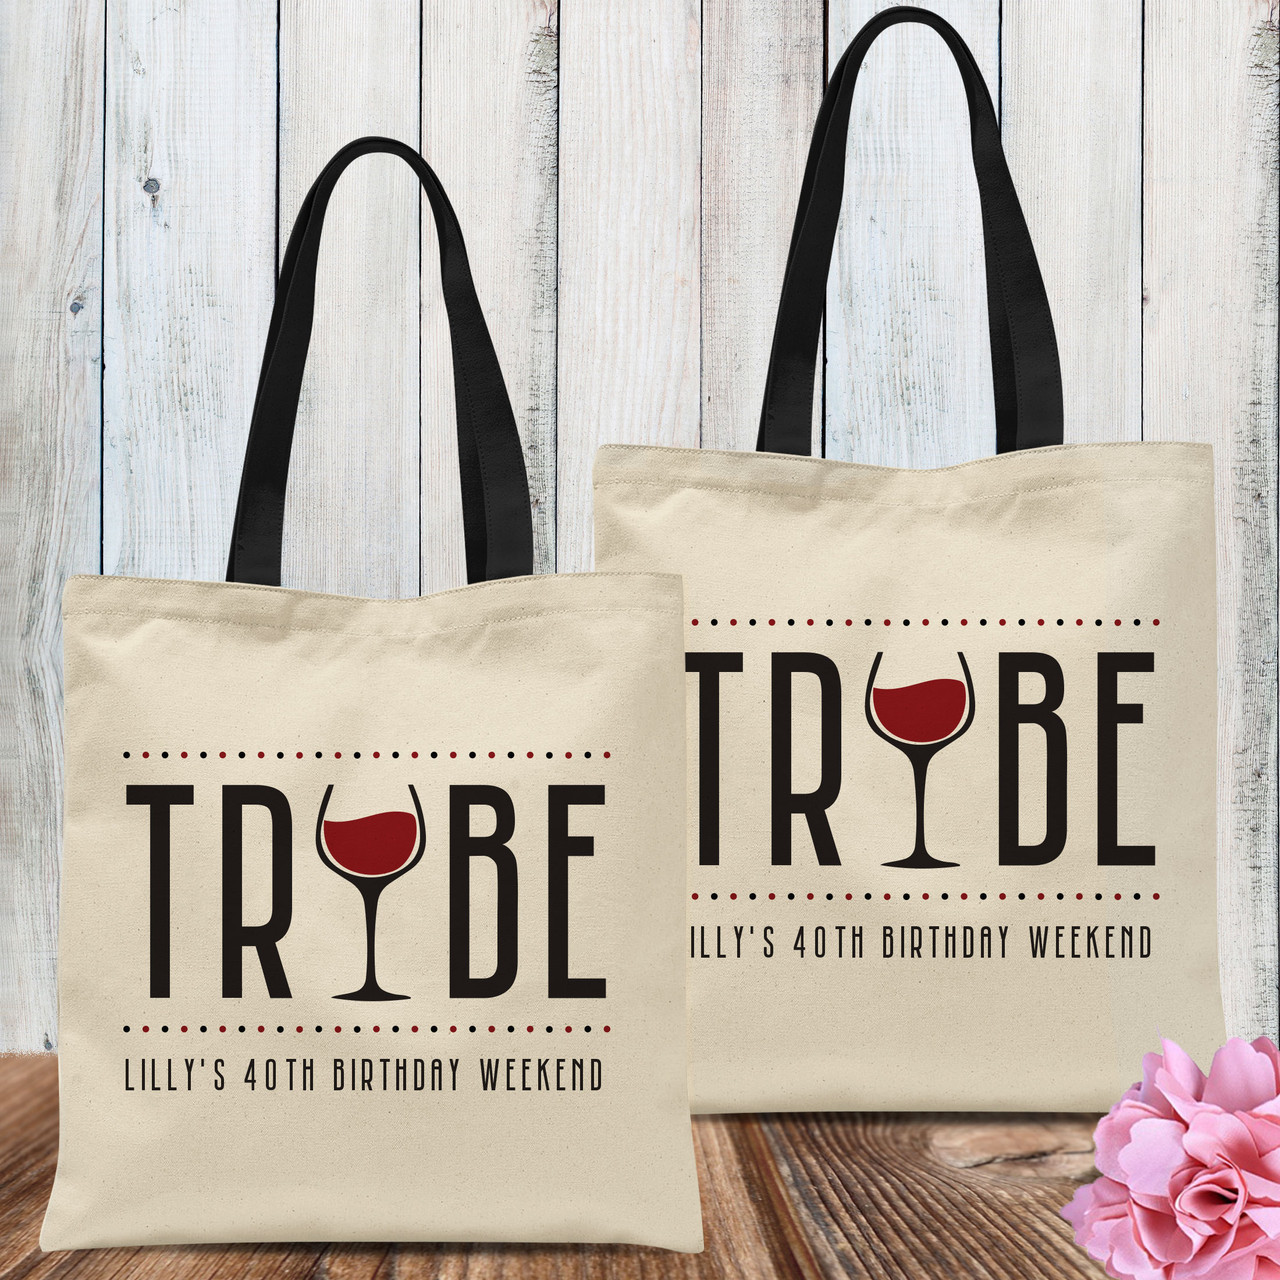 Future Mrs Bride Canvas Tote Bag, Bridal Shower Gifts for Bride